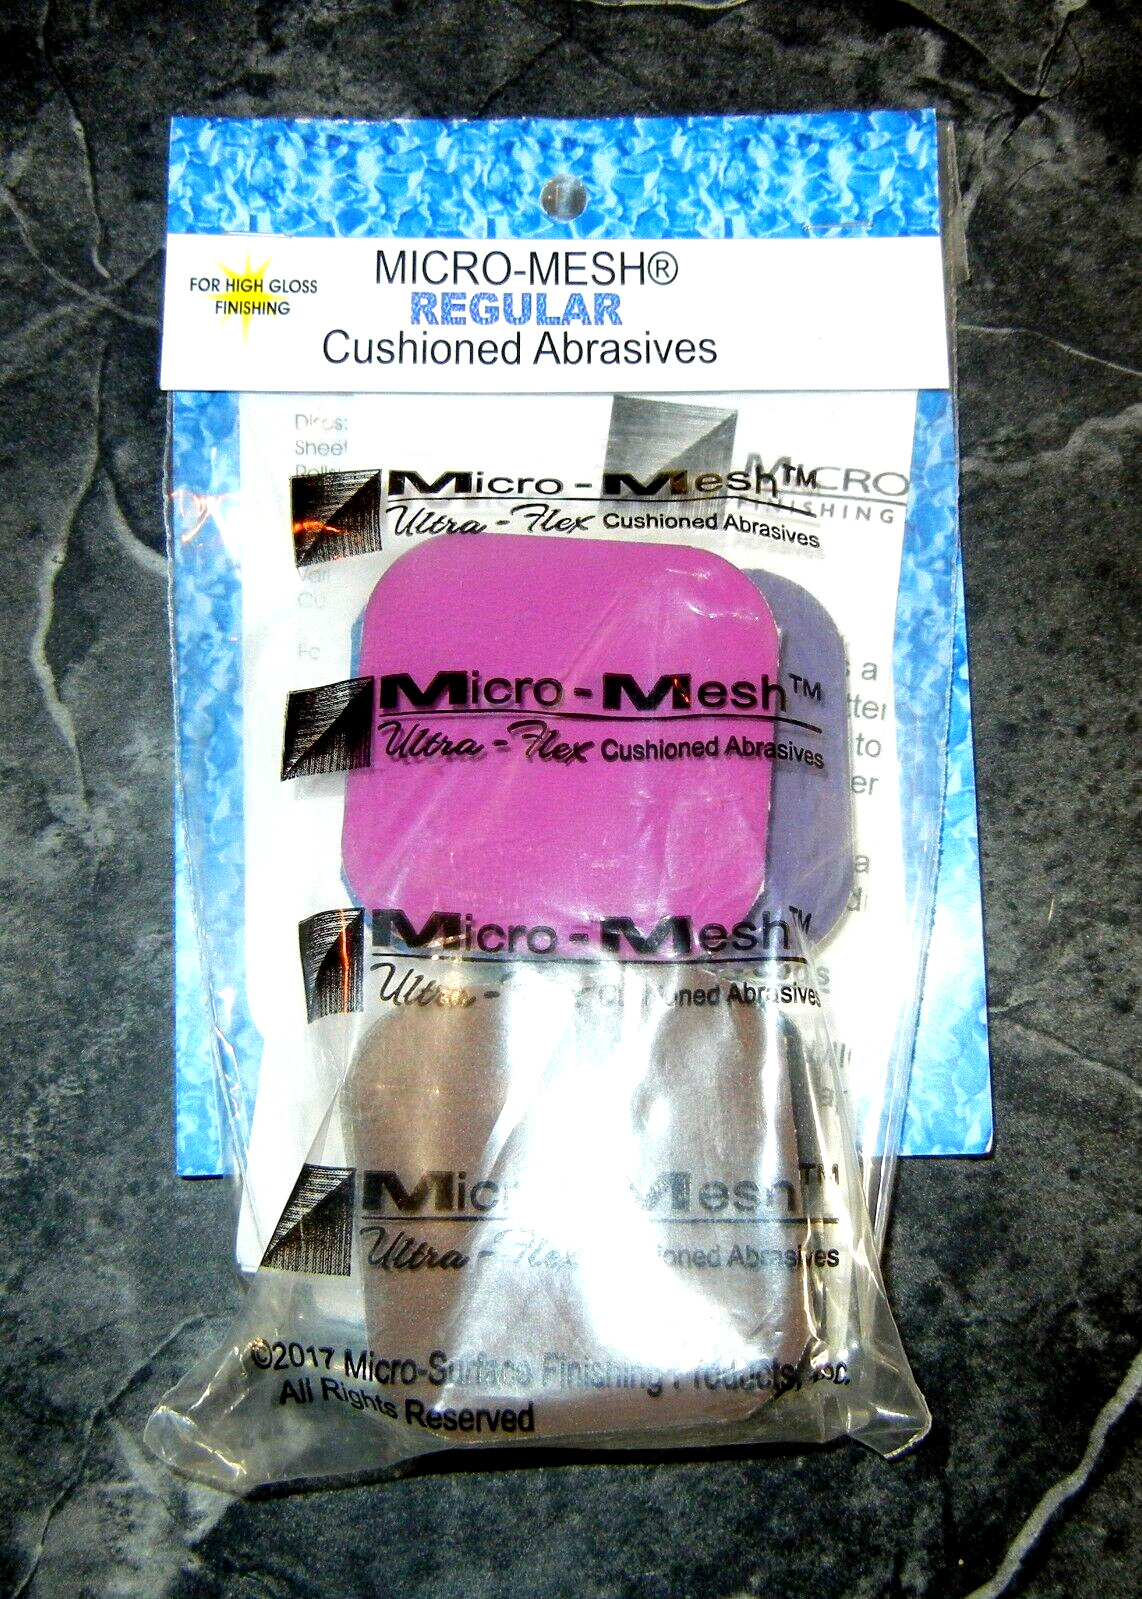 Micro-Mesh Cushioned Abrasives, New in Original Packaging, 1500-12000 Grit